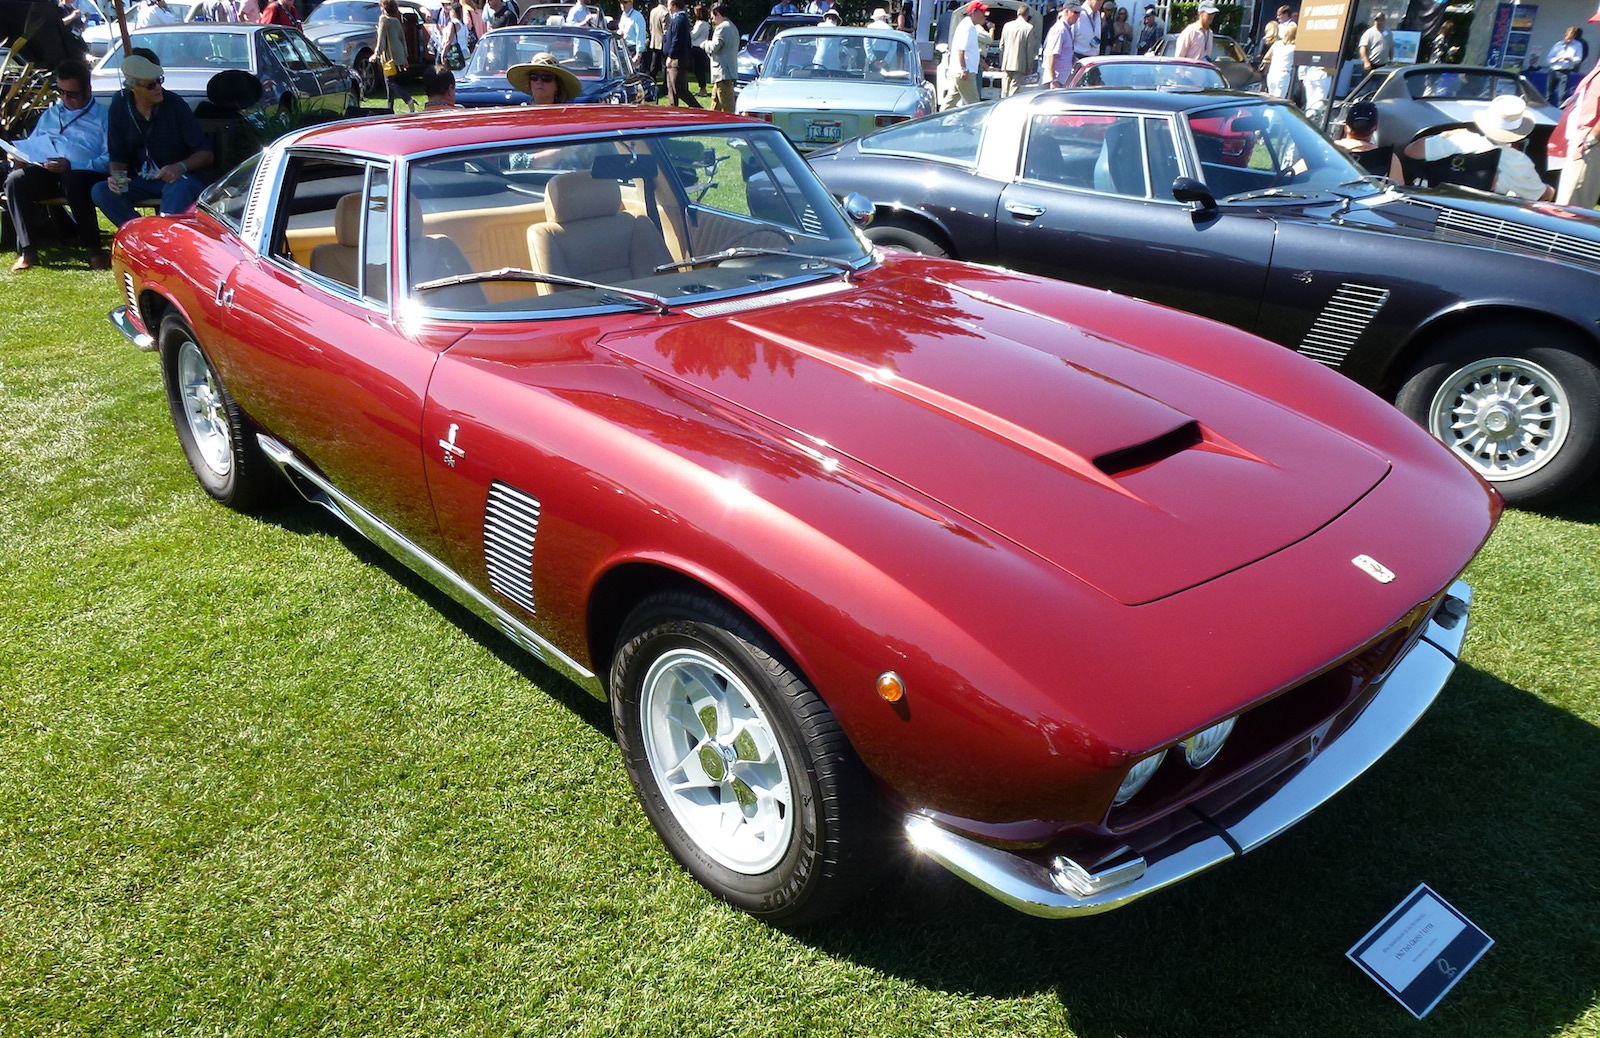 Iso Grifo For Sale - Auction At Amelia Island